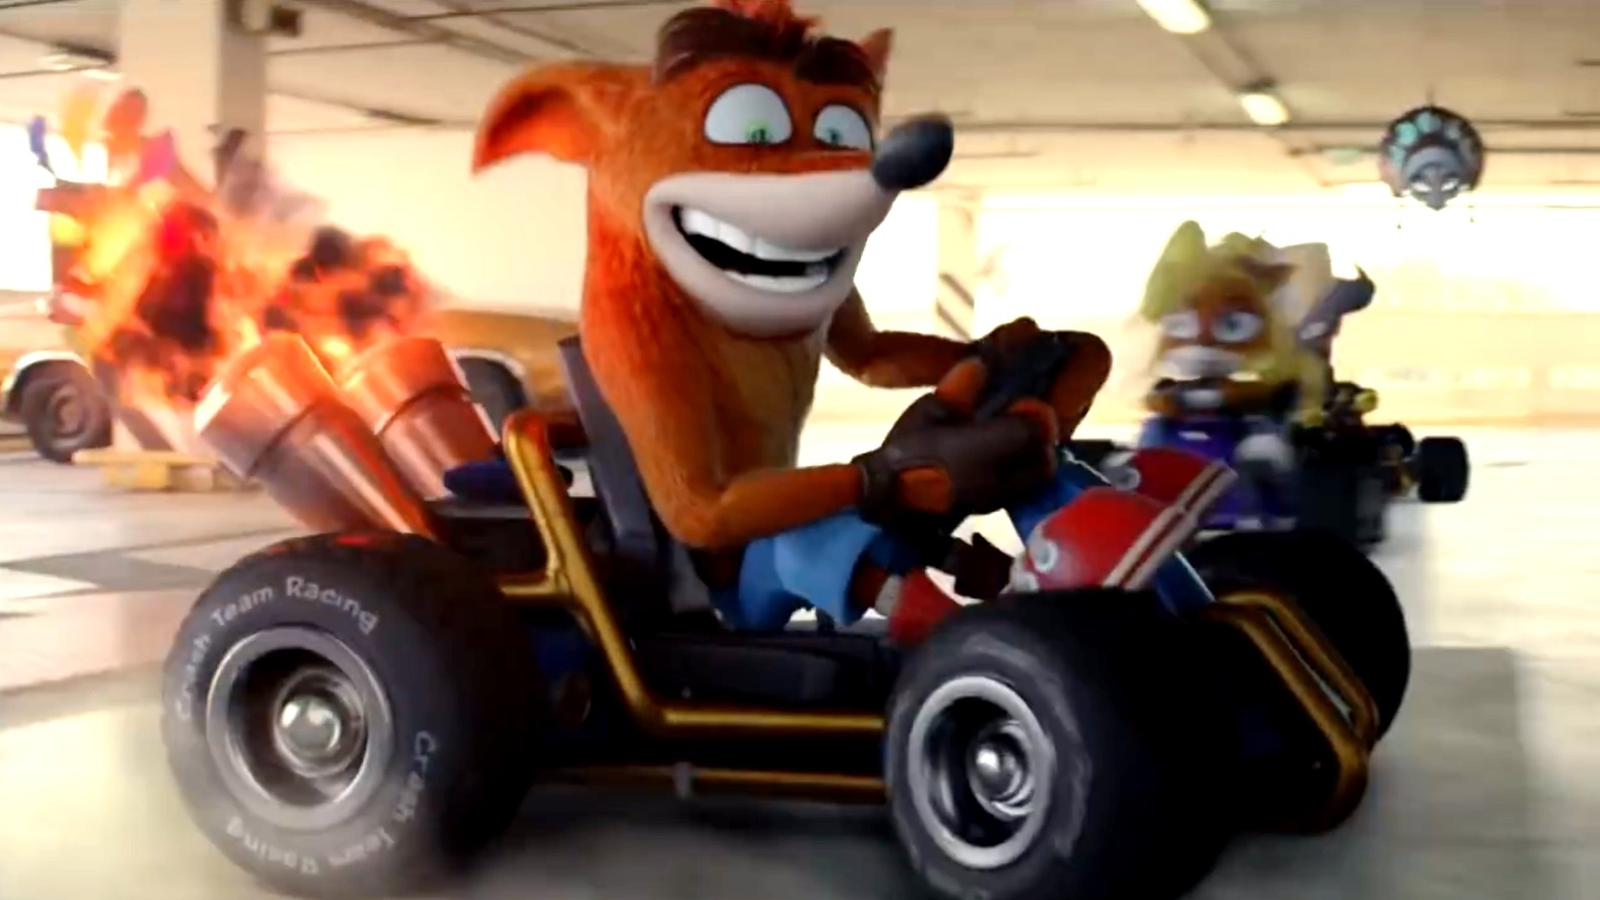 Sony Certainly Aware of Fan Demand for New Crash Bandicoot - GameSpot